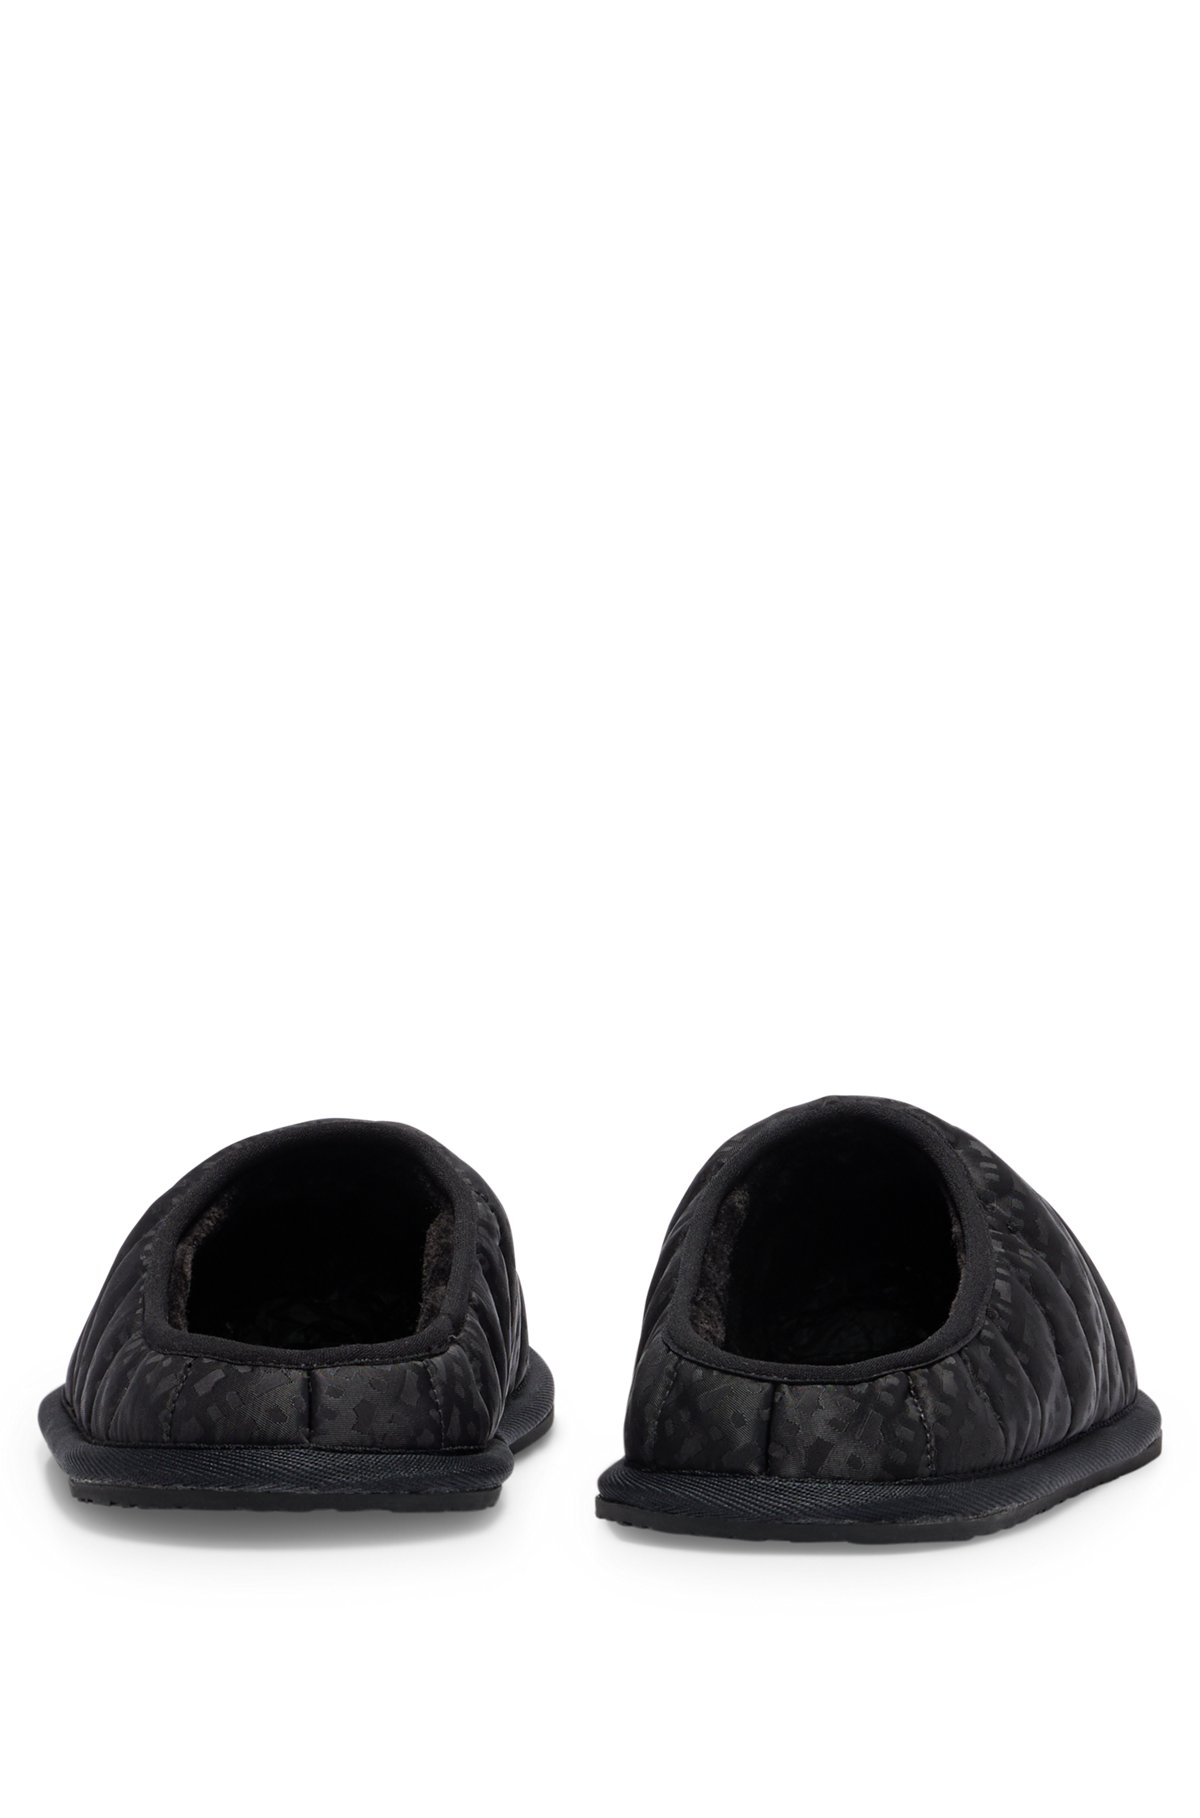 Monogram-jacquard slippers with rubber sole, Black